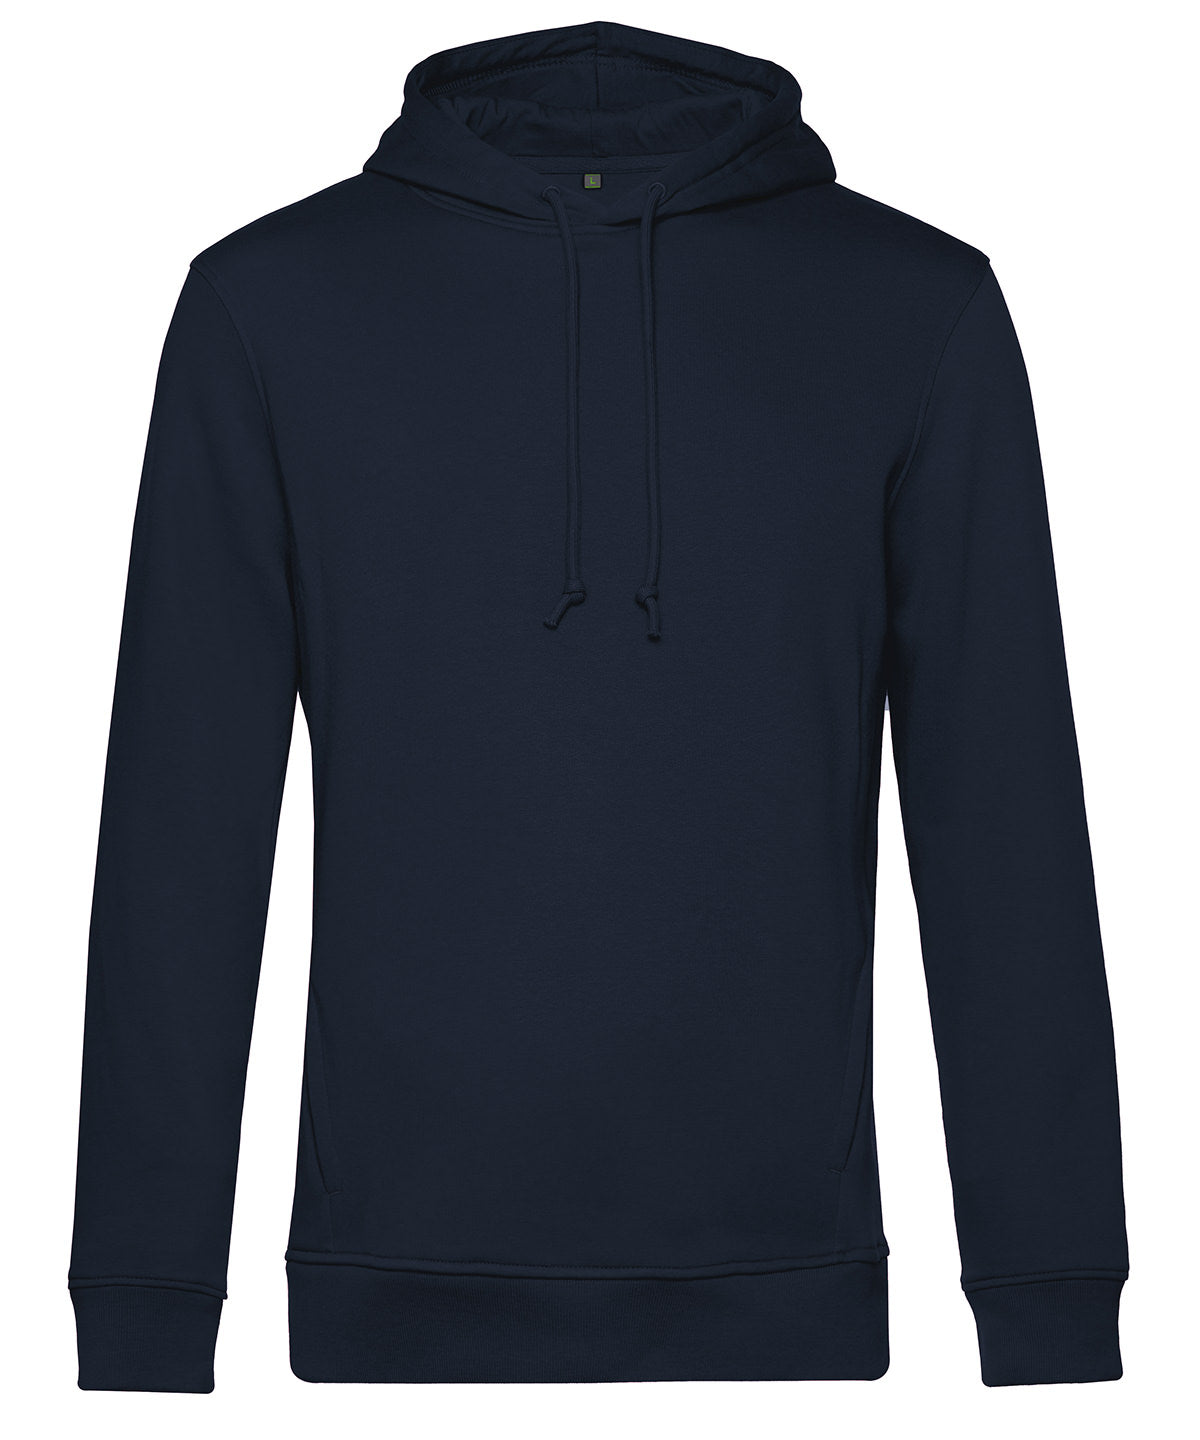 Personalised Hoodies - Light Blue B&C Collection B&C Inspire Hooded